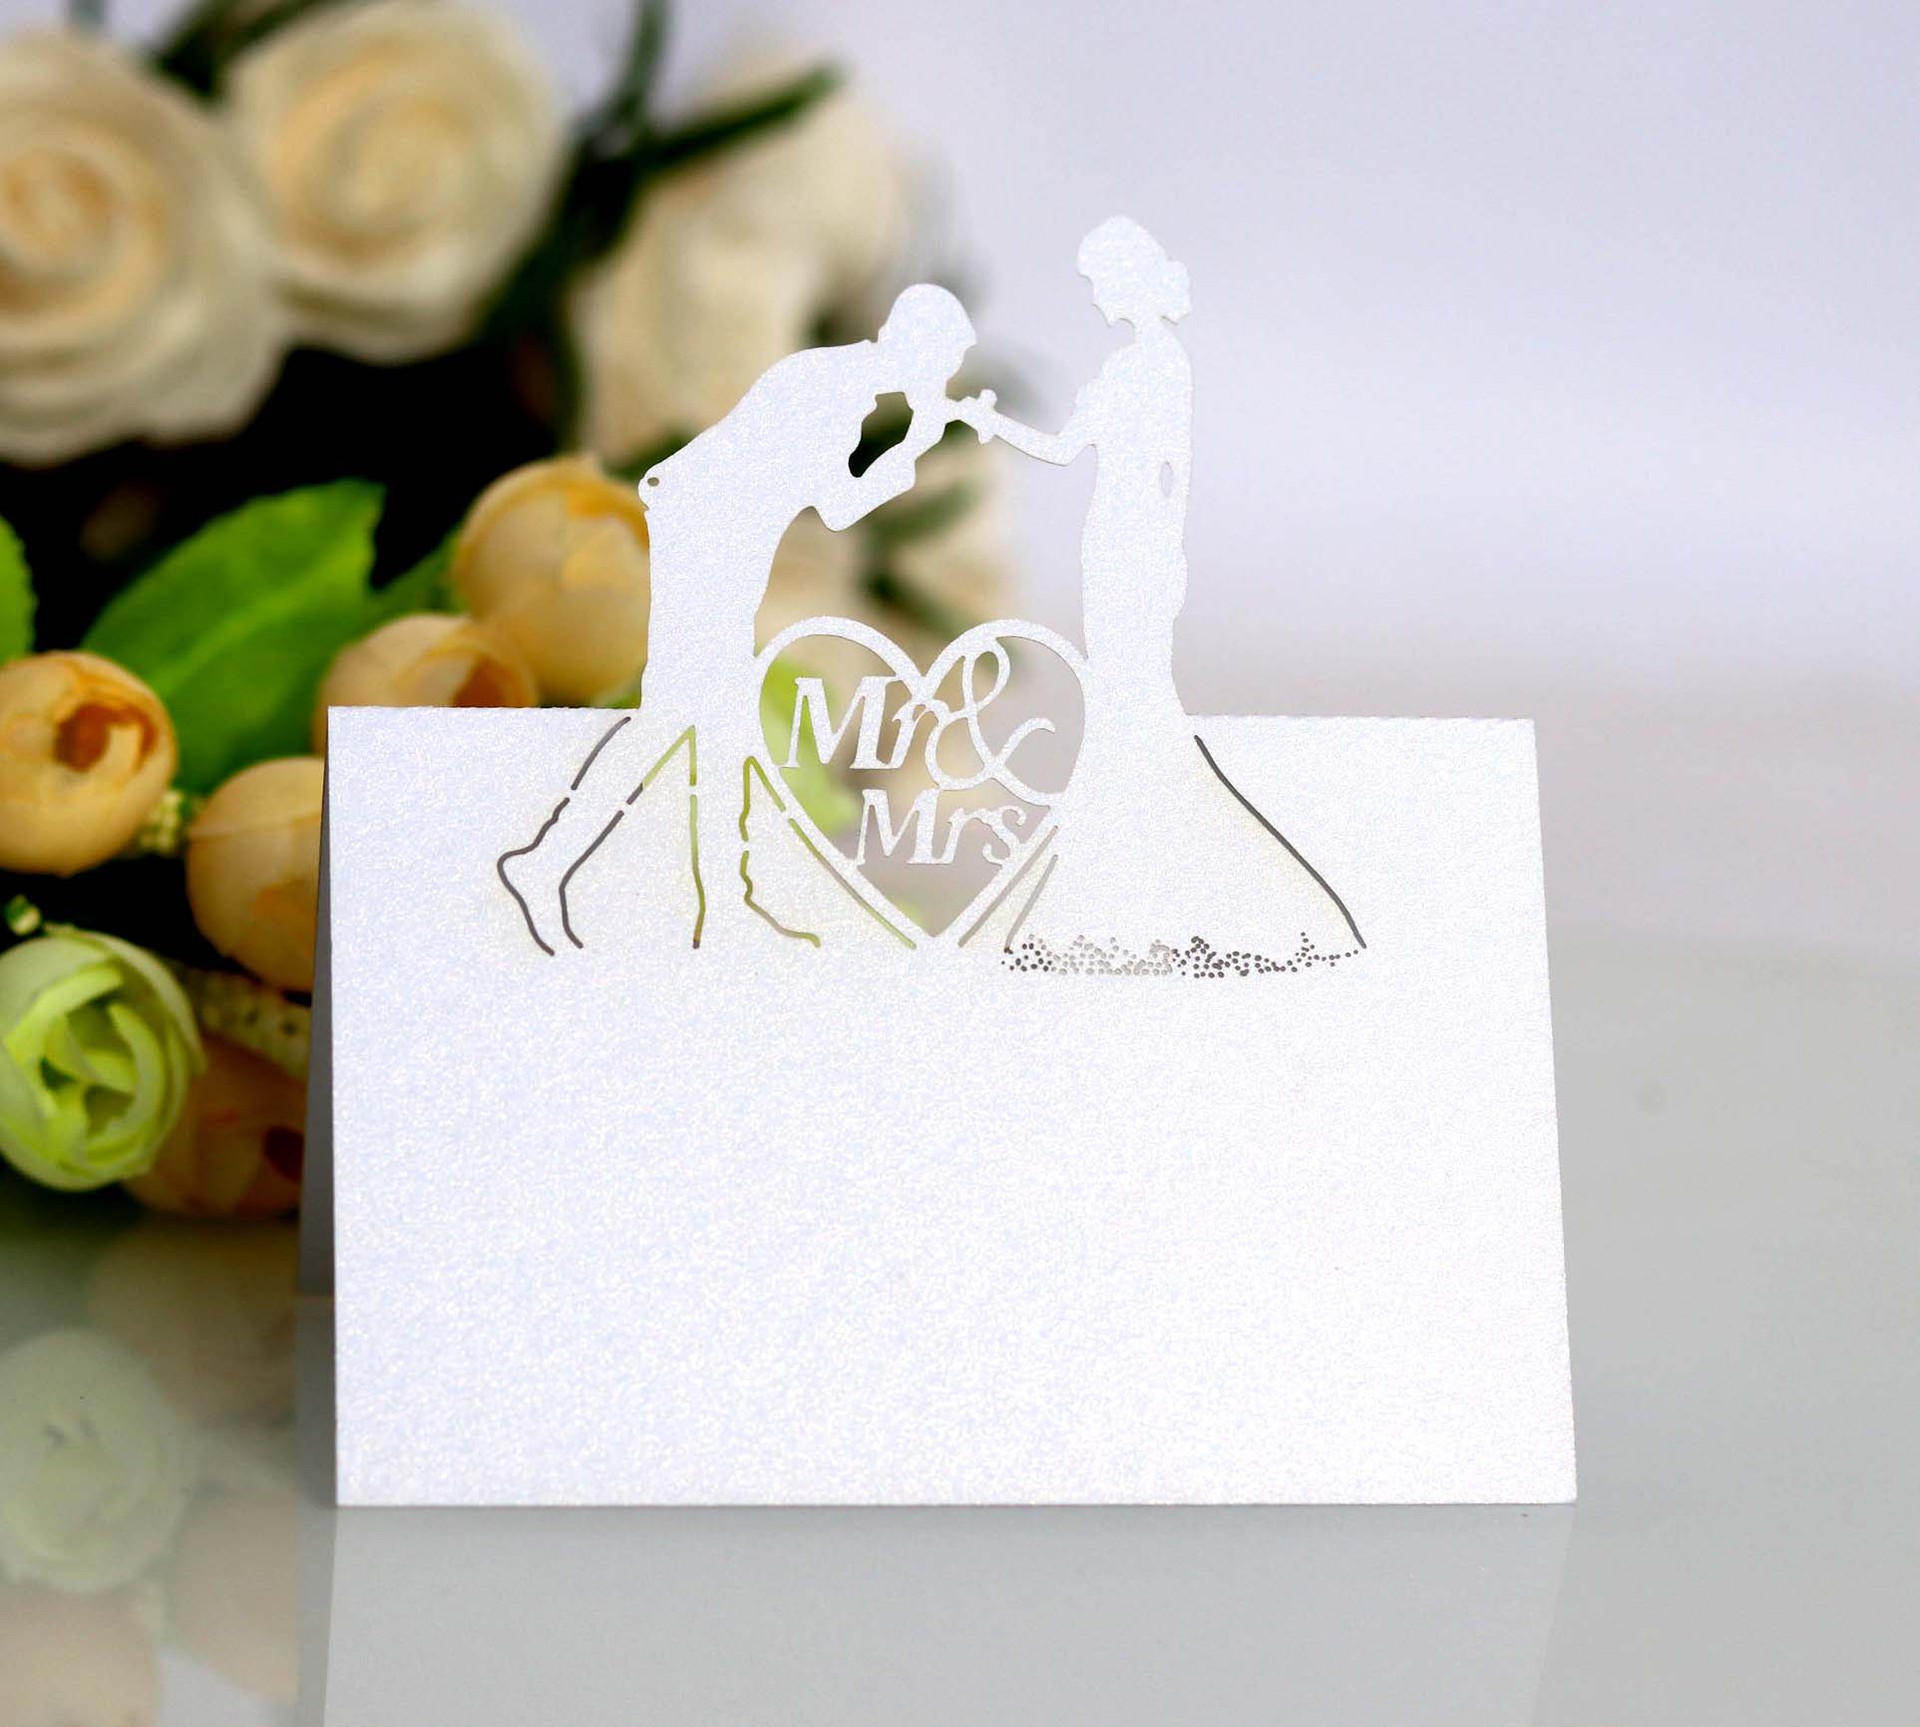 Bride And Groom Name Place Cards Confetti DIY Table Seating Message Greeting Card Baby Shower Birthday Party Wedding Decoration AL9989